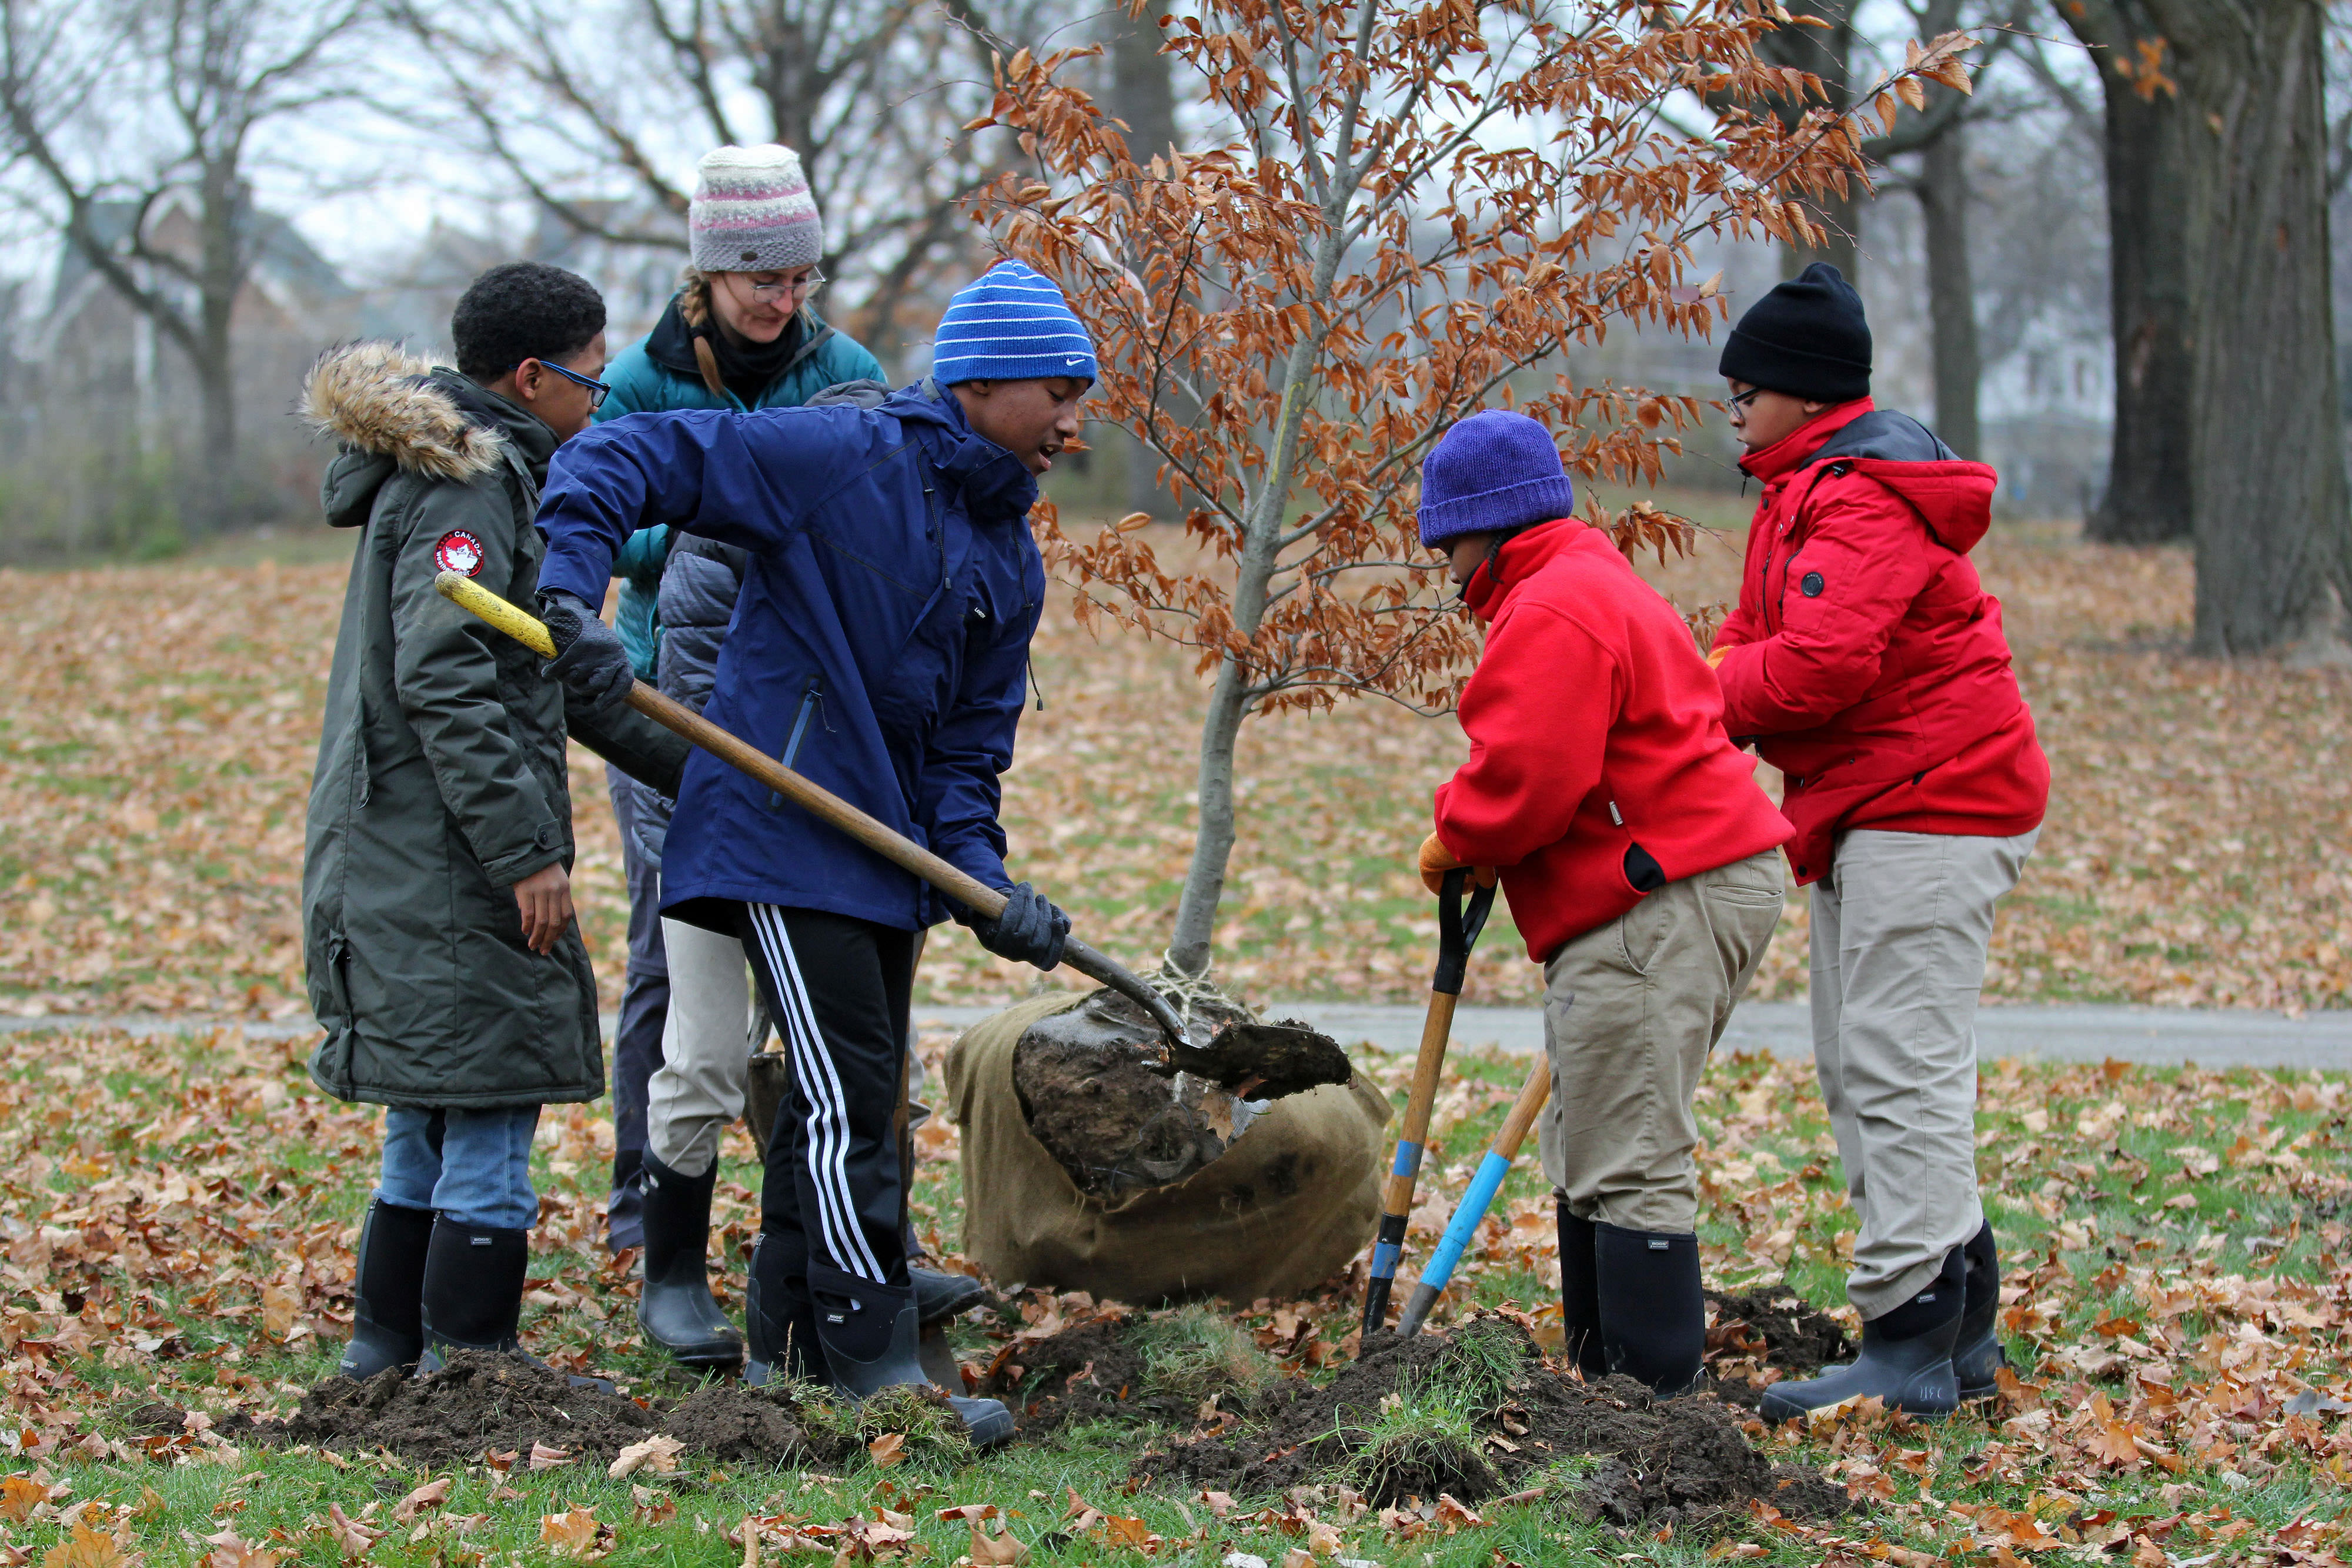 Students plant trees with the Urban Ecology Center in Washington Park.